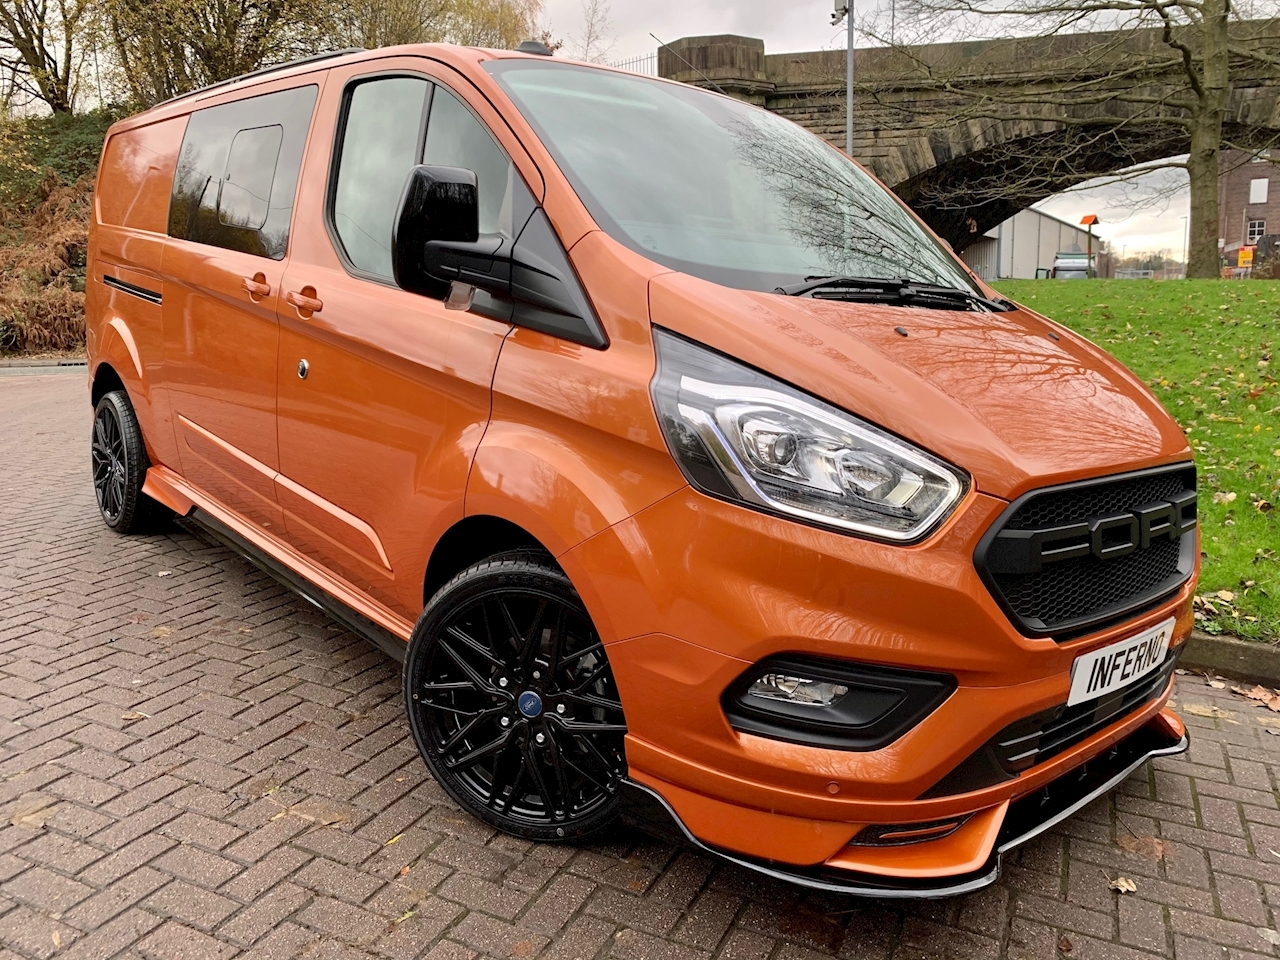 New 2022 Ford Transit Custom DCIV 320 L2 LTD 130PS Panel Van 2.0 Manual  Diesel For Sale in Greater Manchester